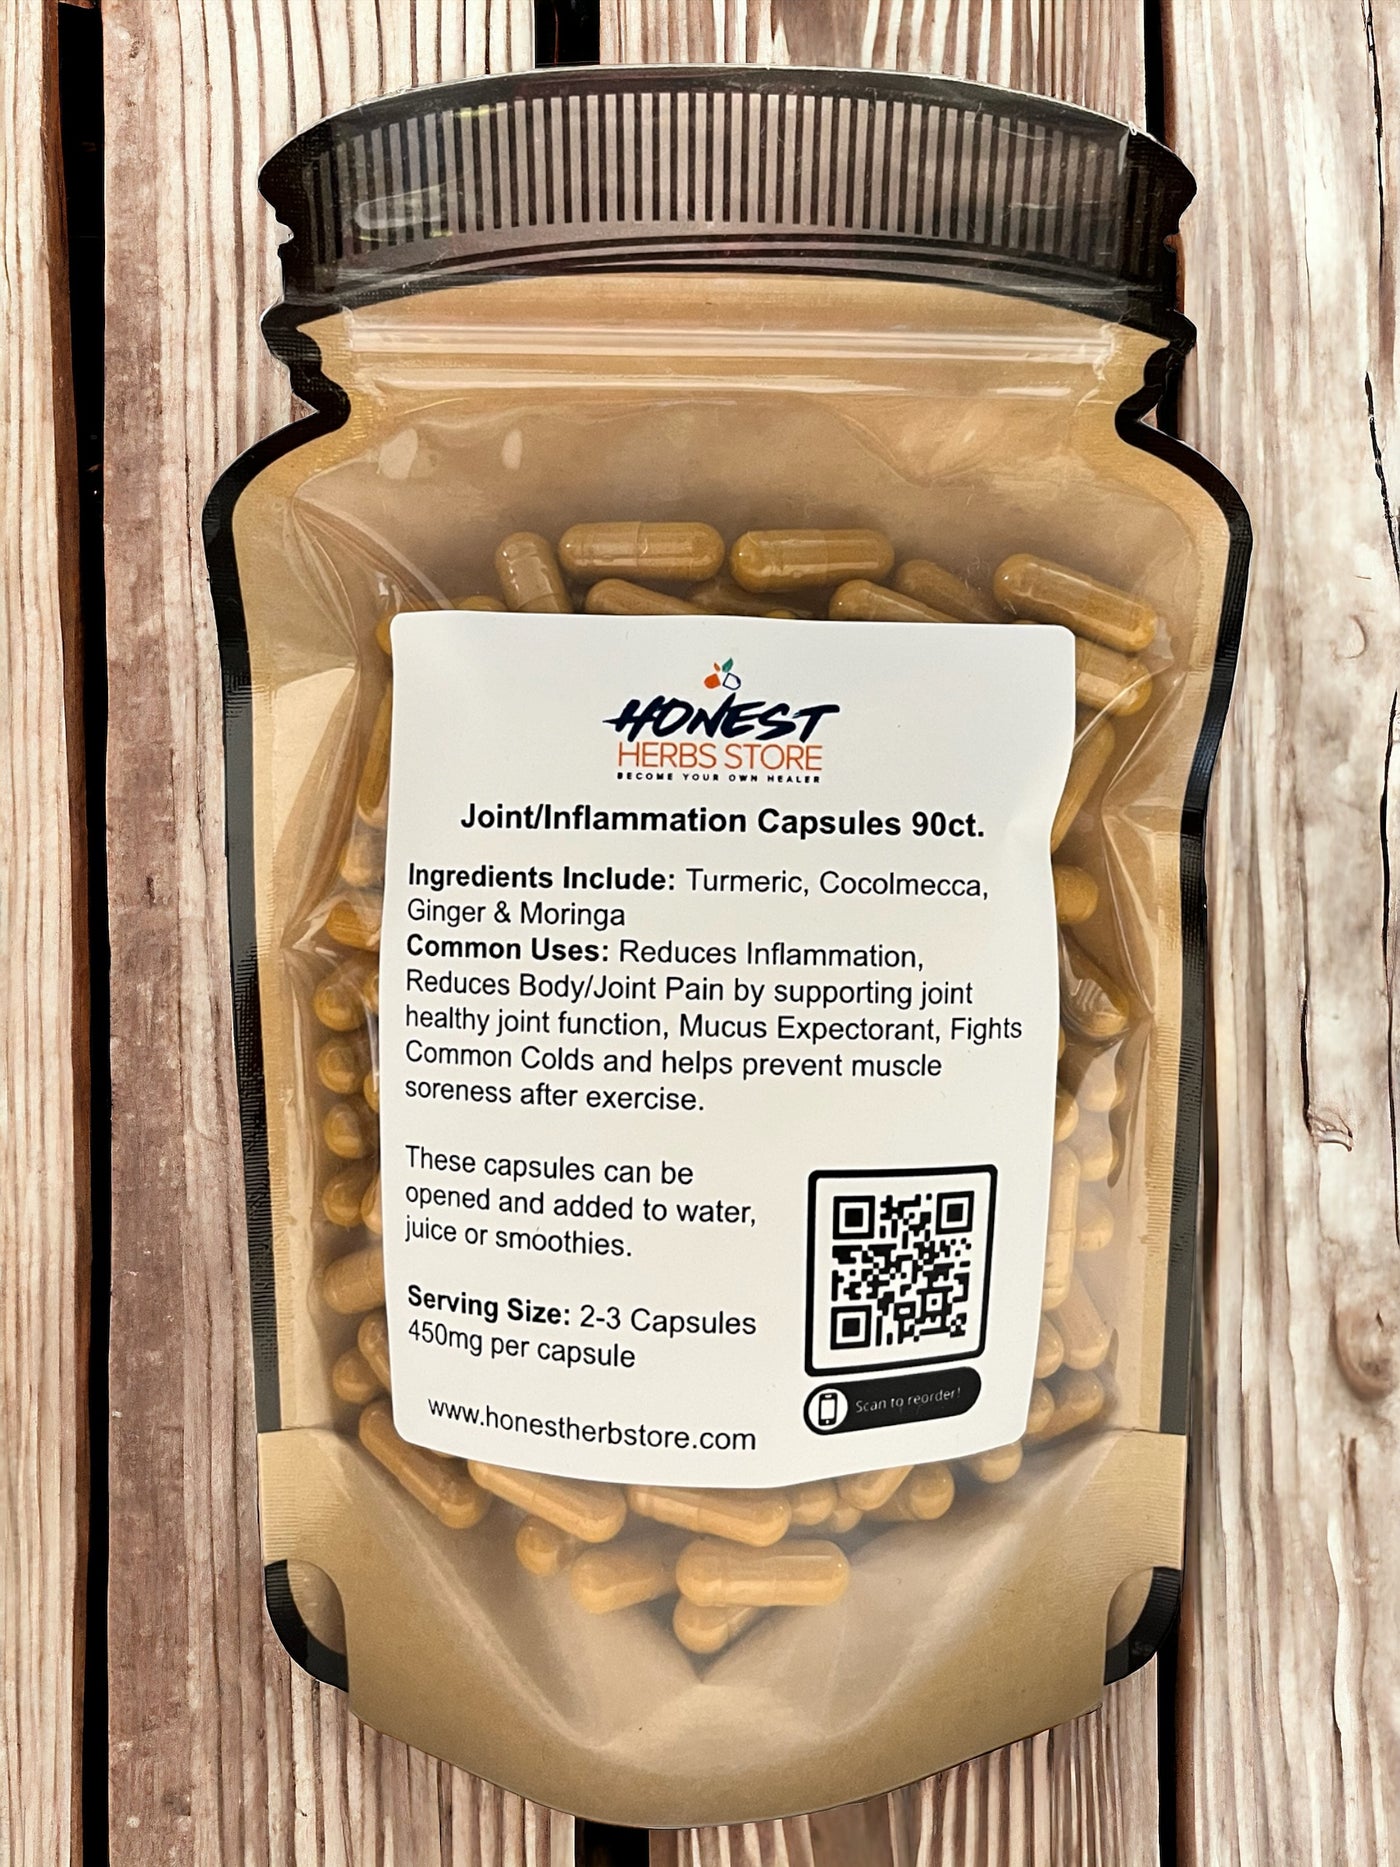 Joint/Inflammation Capsules